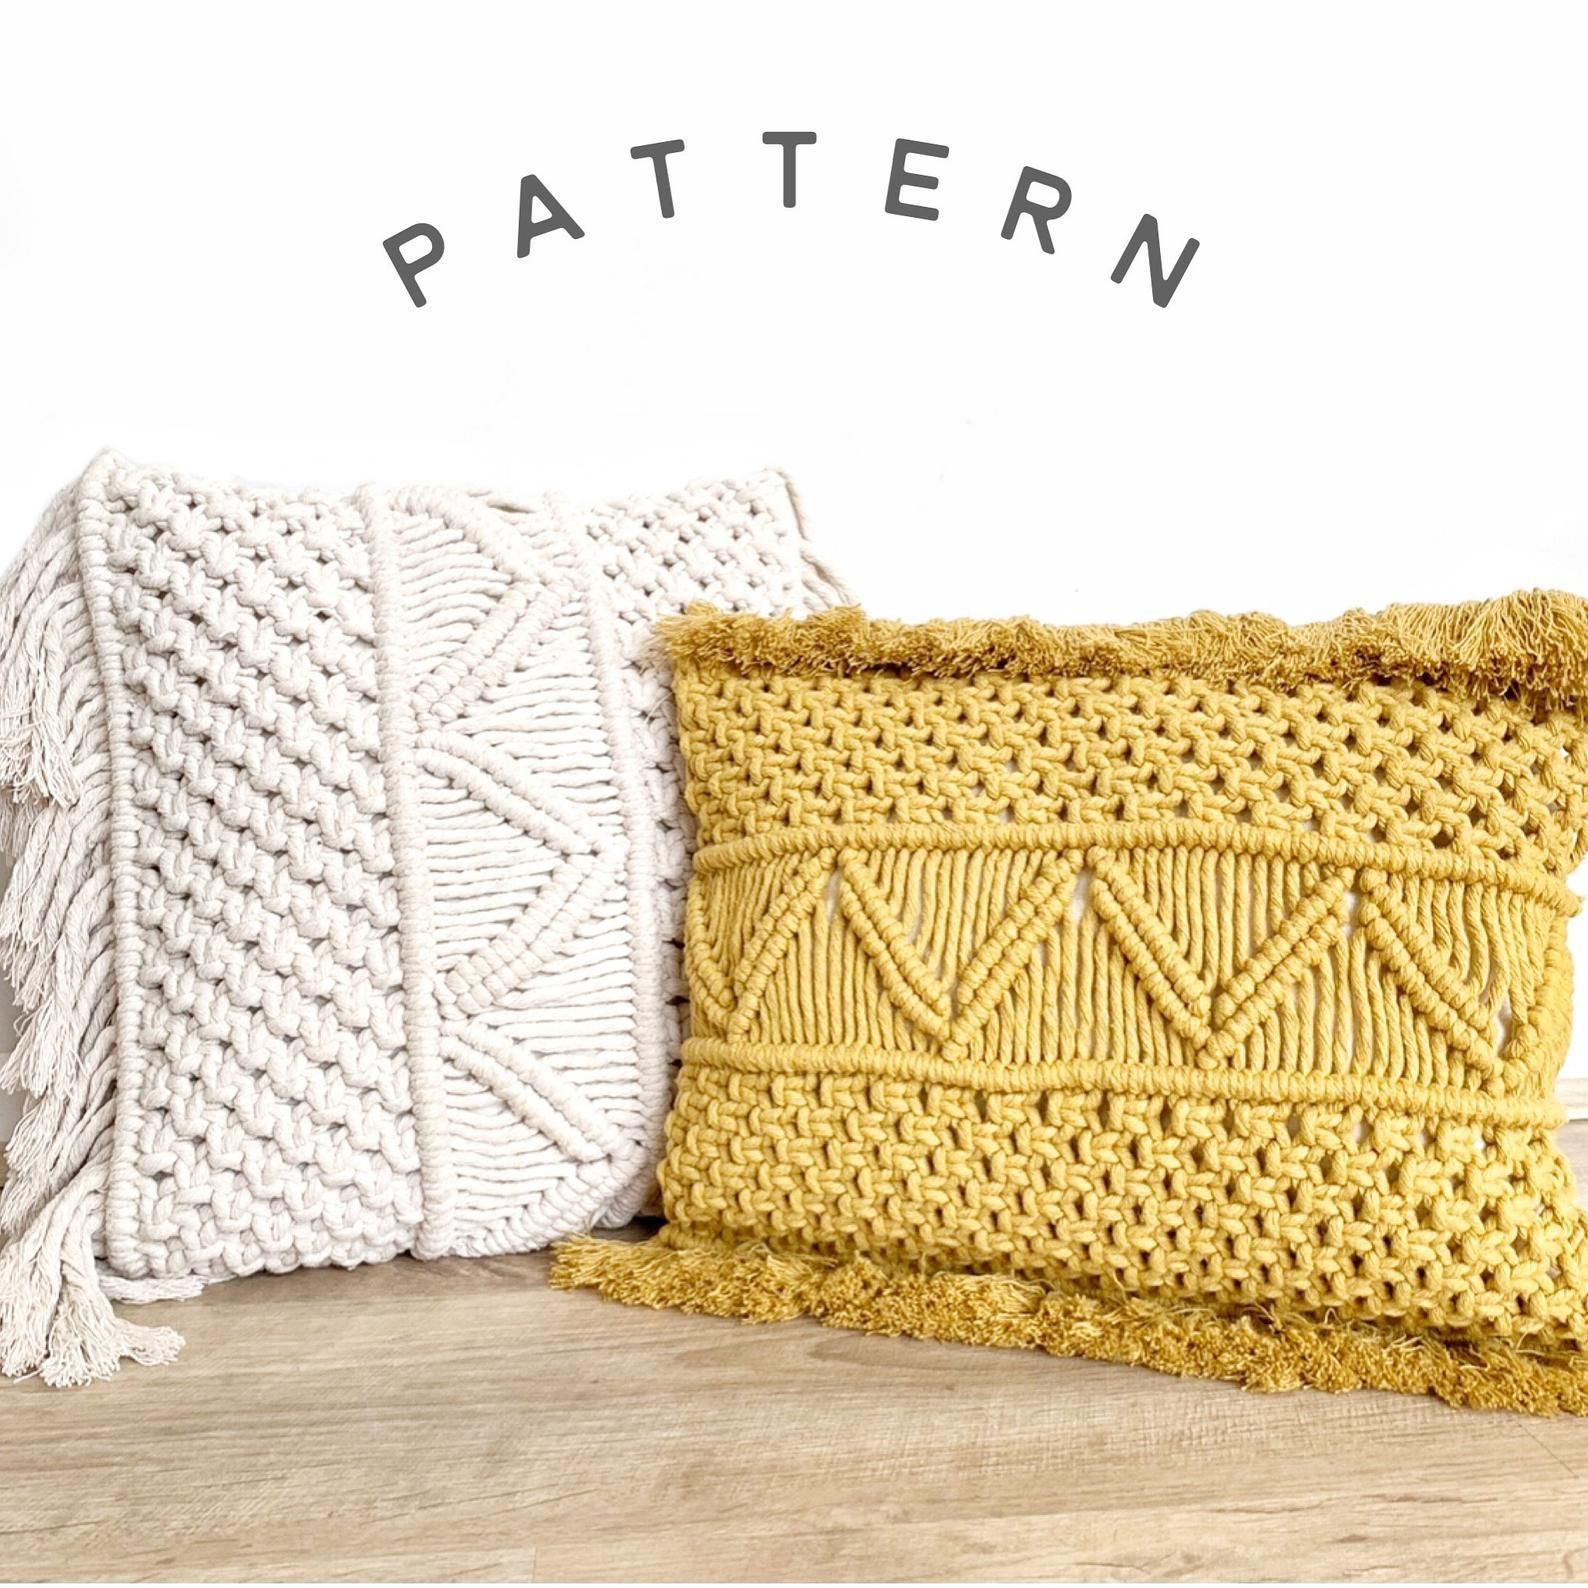 Macrame Pattern/Tutorial for Pillow Cover Cushion Case DIY Beginners Lesson, Macrame Instructions, Guide, Macrame Book, Wall Hanging - Macrame Pattern/Tutorial for Pillow Cover Cushion Case DIY Beginners Lesson, Macrame Instructions, Guide, Macrame Book, Wall Hanging -   19 diy Pillows case ideas